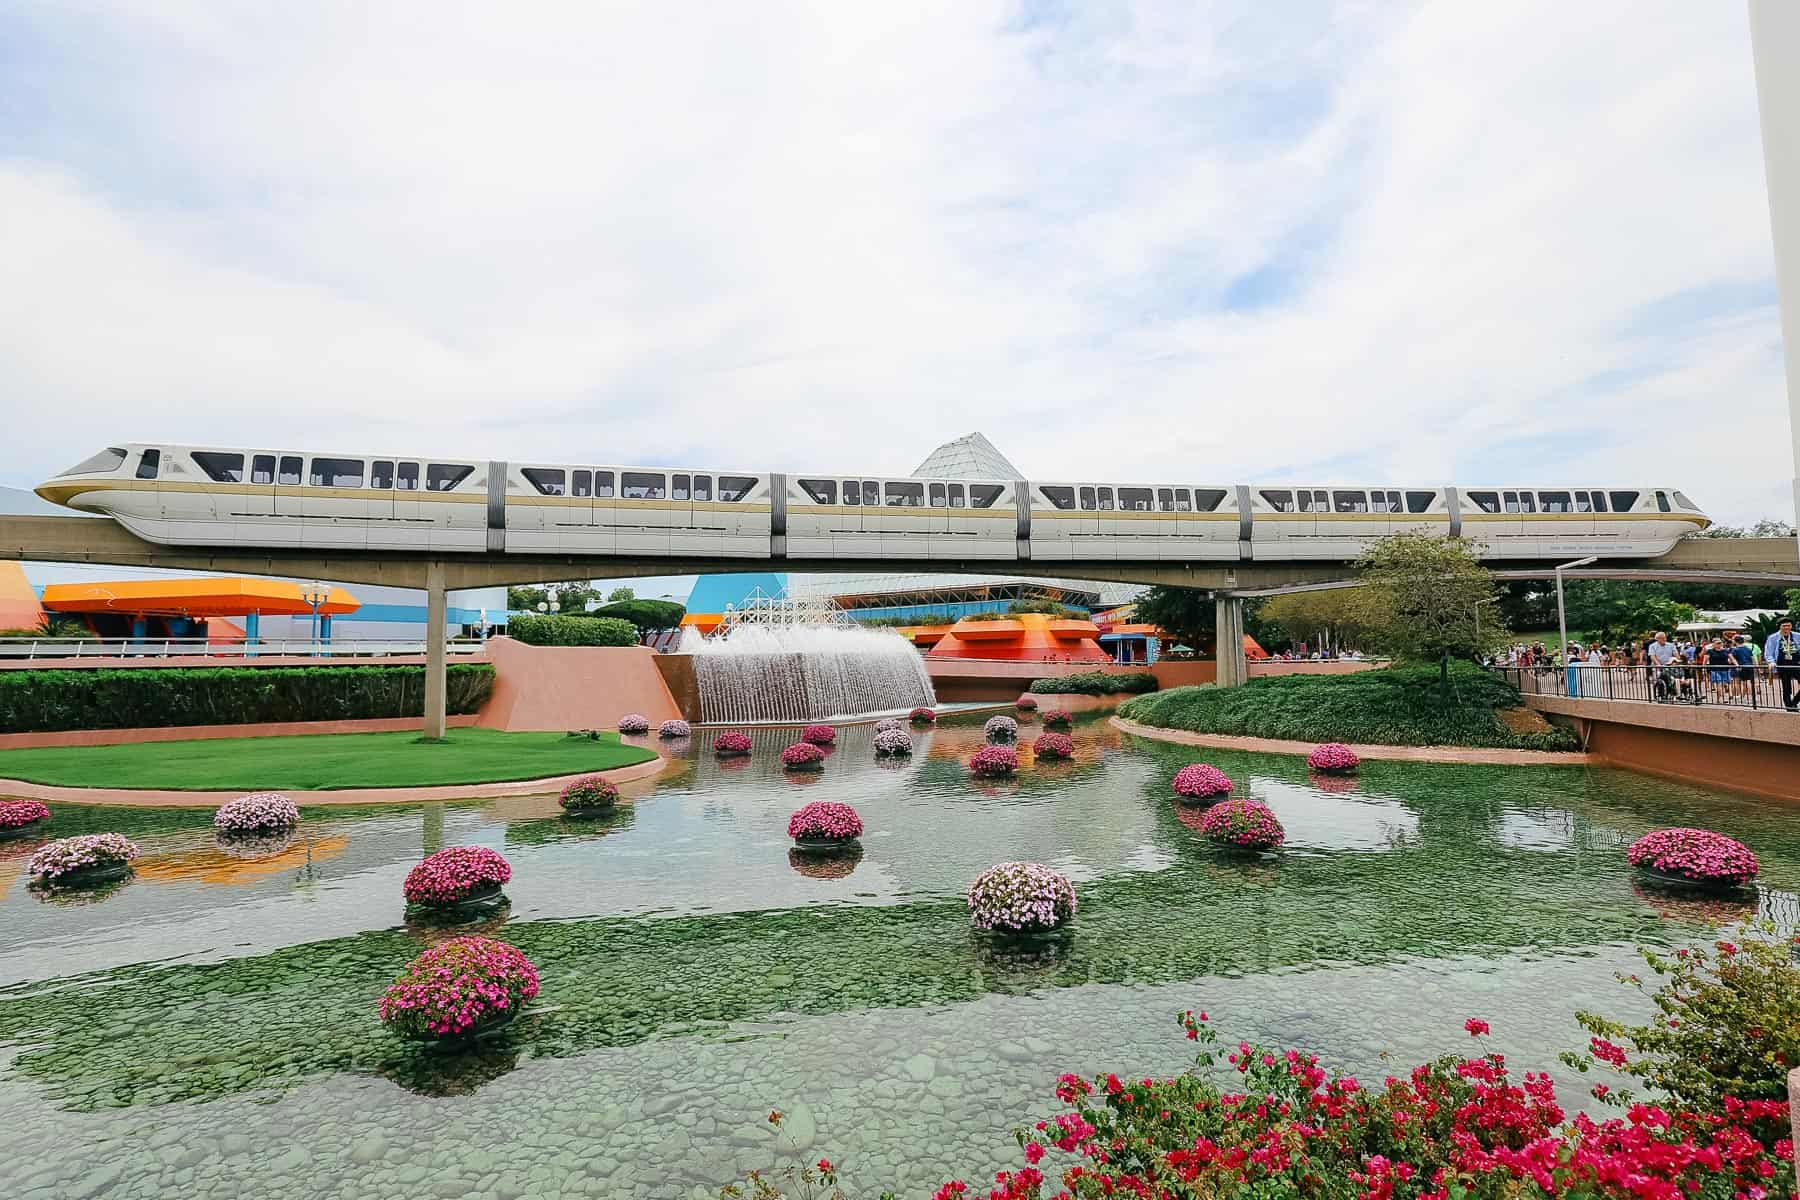 the monorail passing through Epcot 